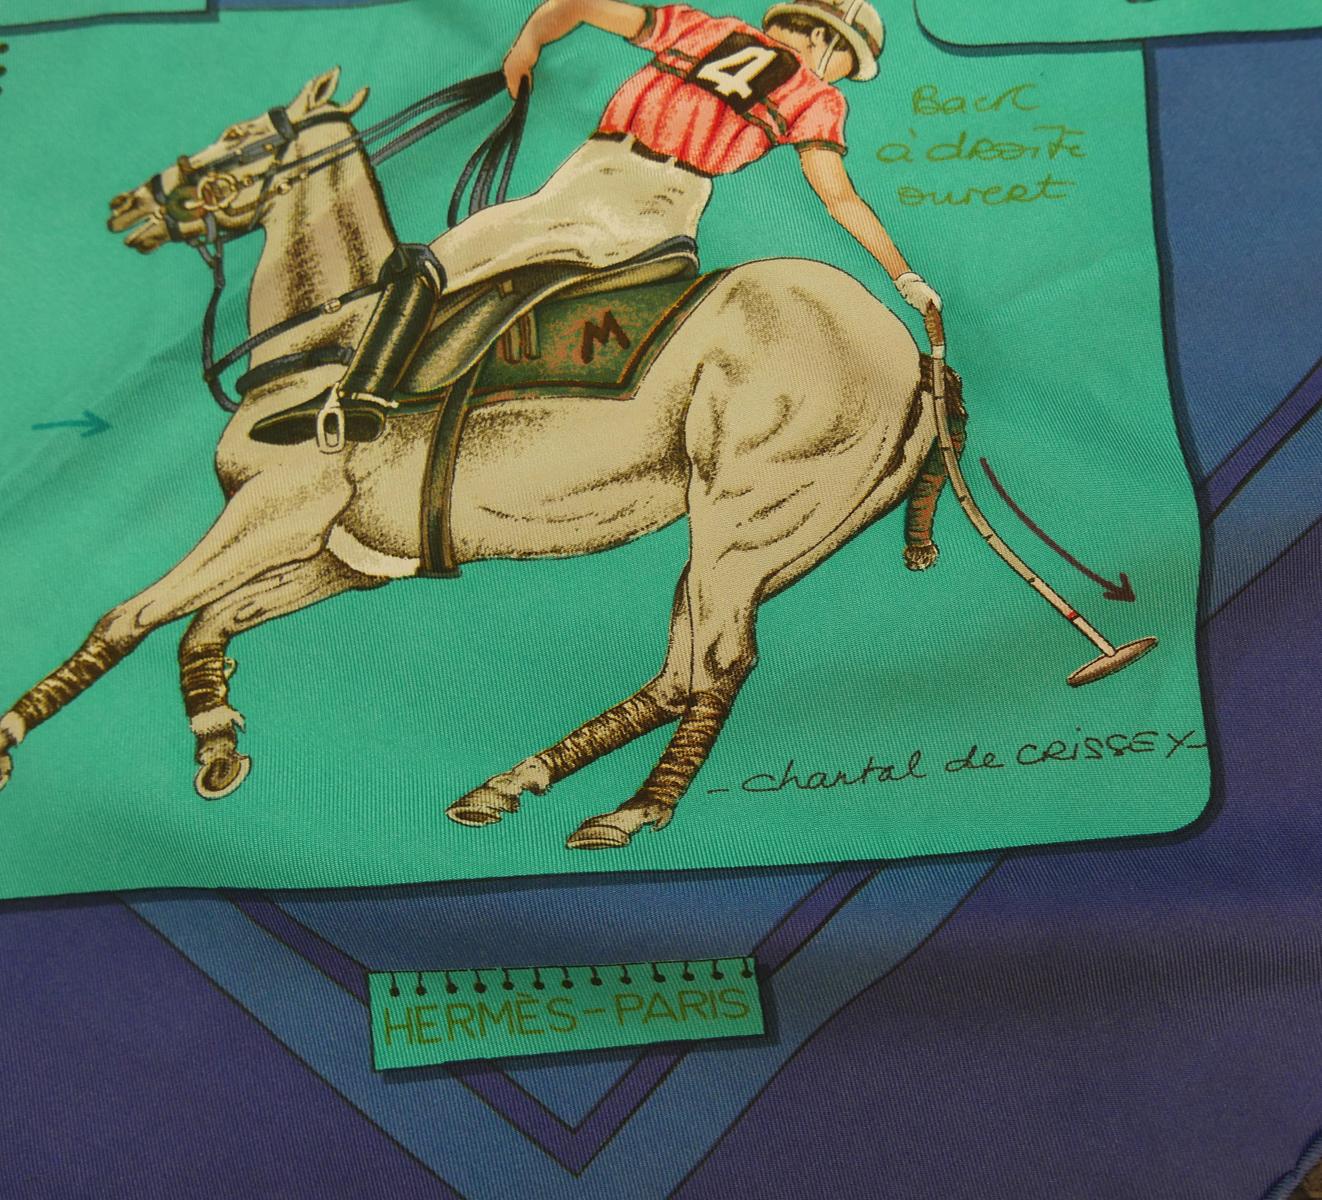 This vintage signed Hermes scarf features “Le Monde du Polo”, originally designed by Chantal de Crissey, depicting various notated polo scenes with blue and turquoise background.  In excellent condition, this scarf measures 35” square and is signed